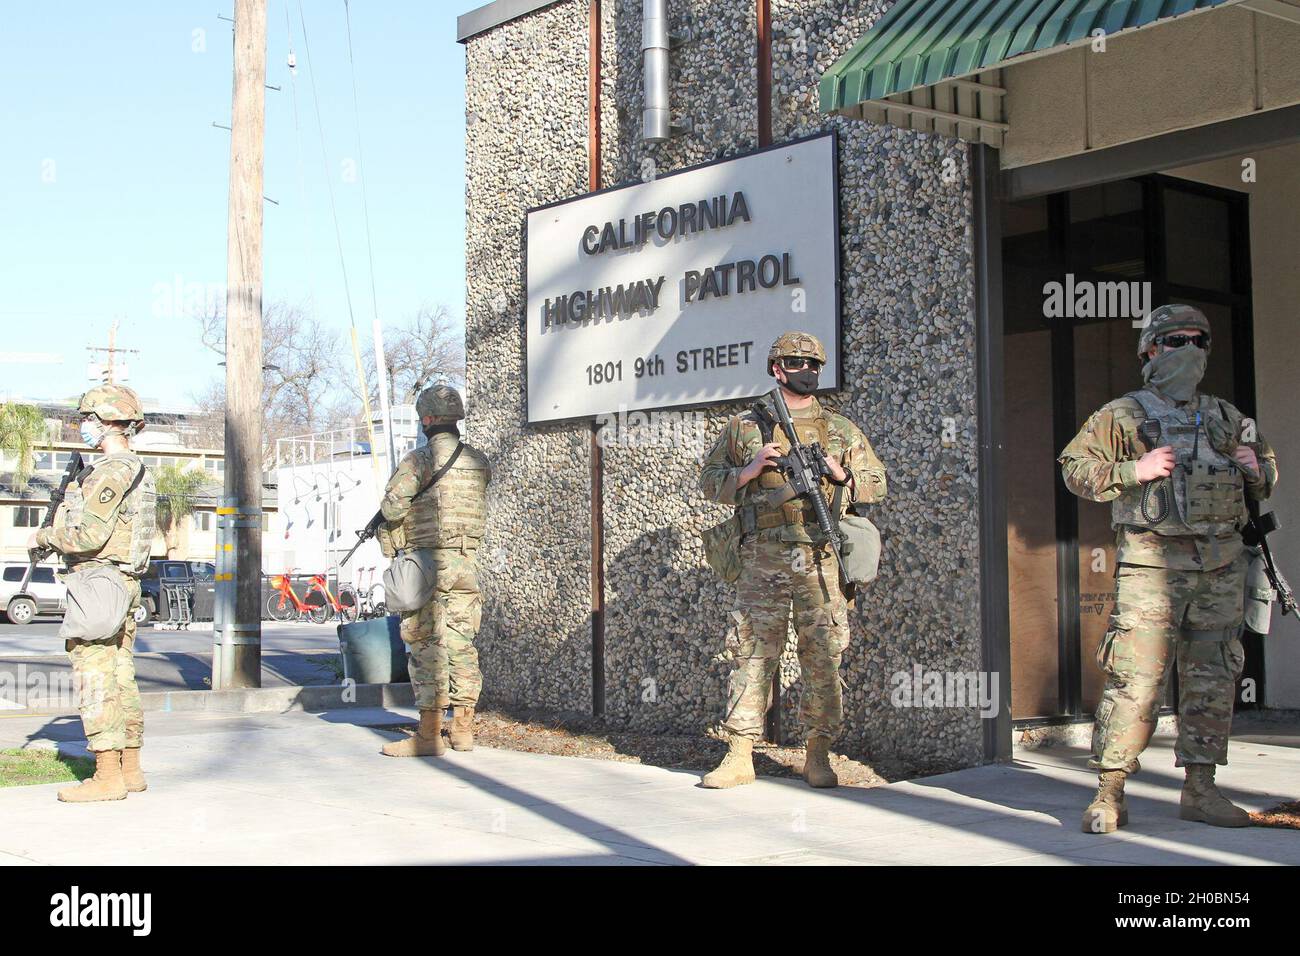 A California Army National Guard team of “Bridge Builders” — members of the 132nd Multirole Bridge Company, 579th Engineer Battalion, 49th Military Police Brigade — provide security at the California Highway Patrol office near the Capitol in Sacramento, California, Jan. 20, 2021. Cal Guard engineers are also on special assignment, joining infantrymen, military police and field artillerymen as the main force surrounding the state capitol during the inauguration of President Biden. The engineers shown: Spc. Kaylie Little, Pfc. Morgan Fults, Staff Sgt. Rusty Chambers and Pfc. Dylan Eagles. The 13 Stock Photo